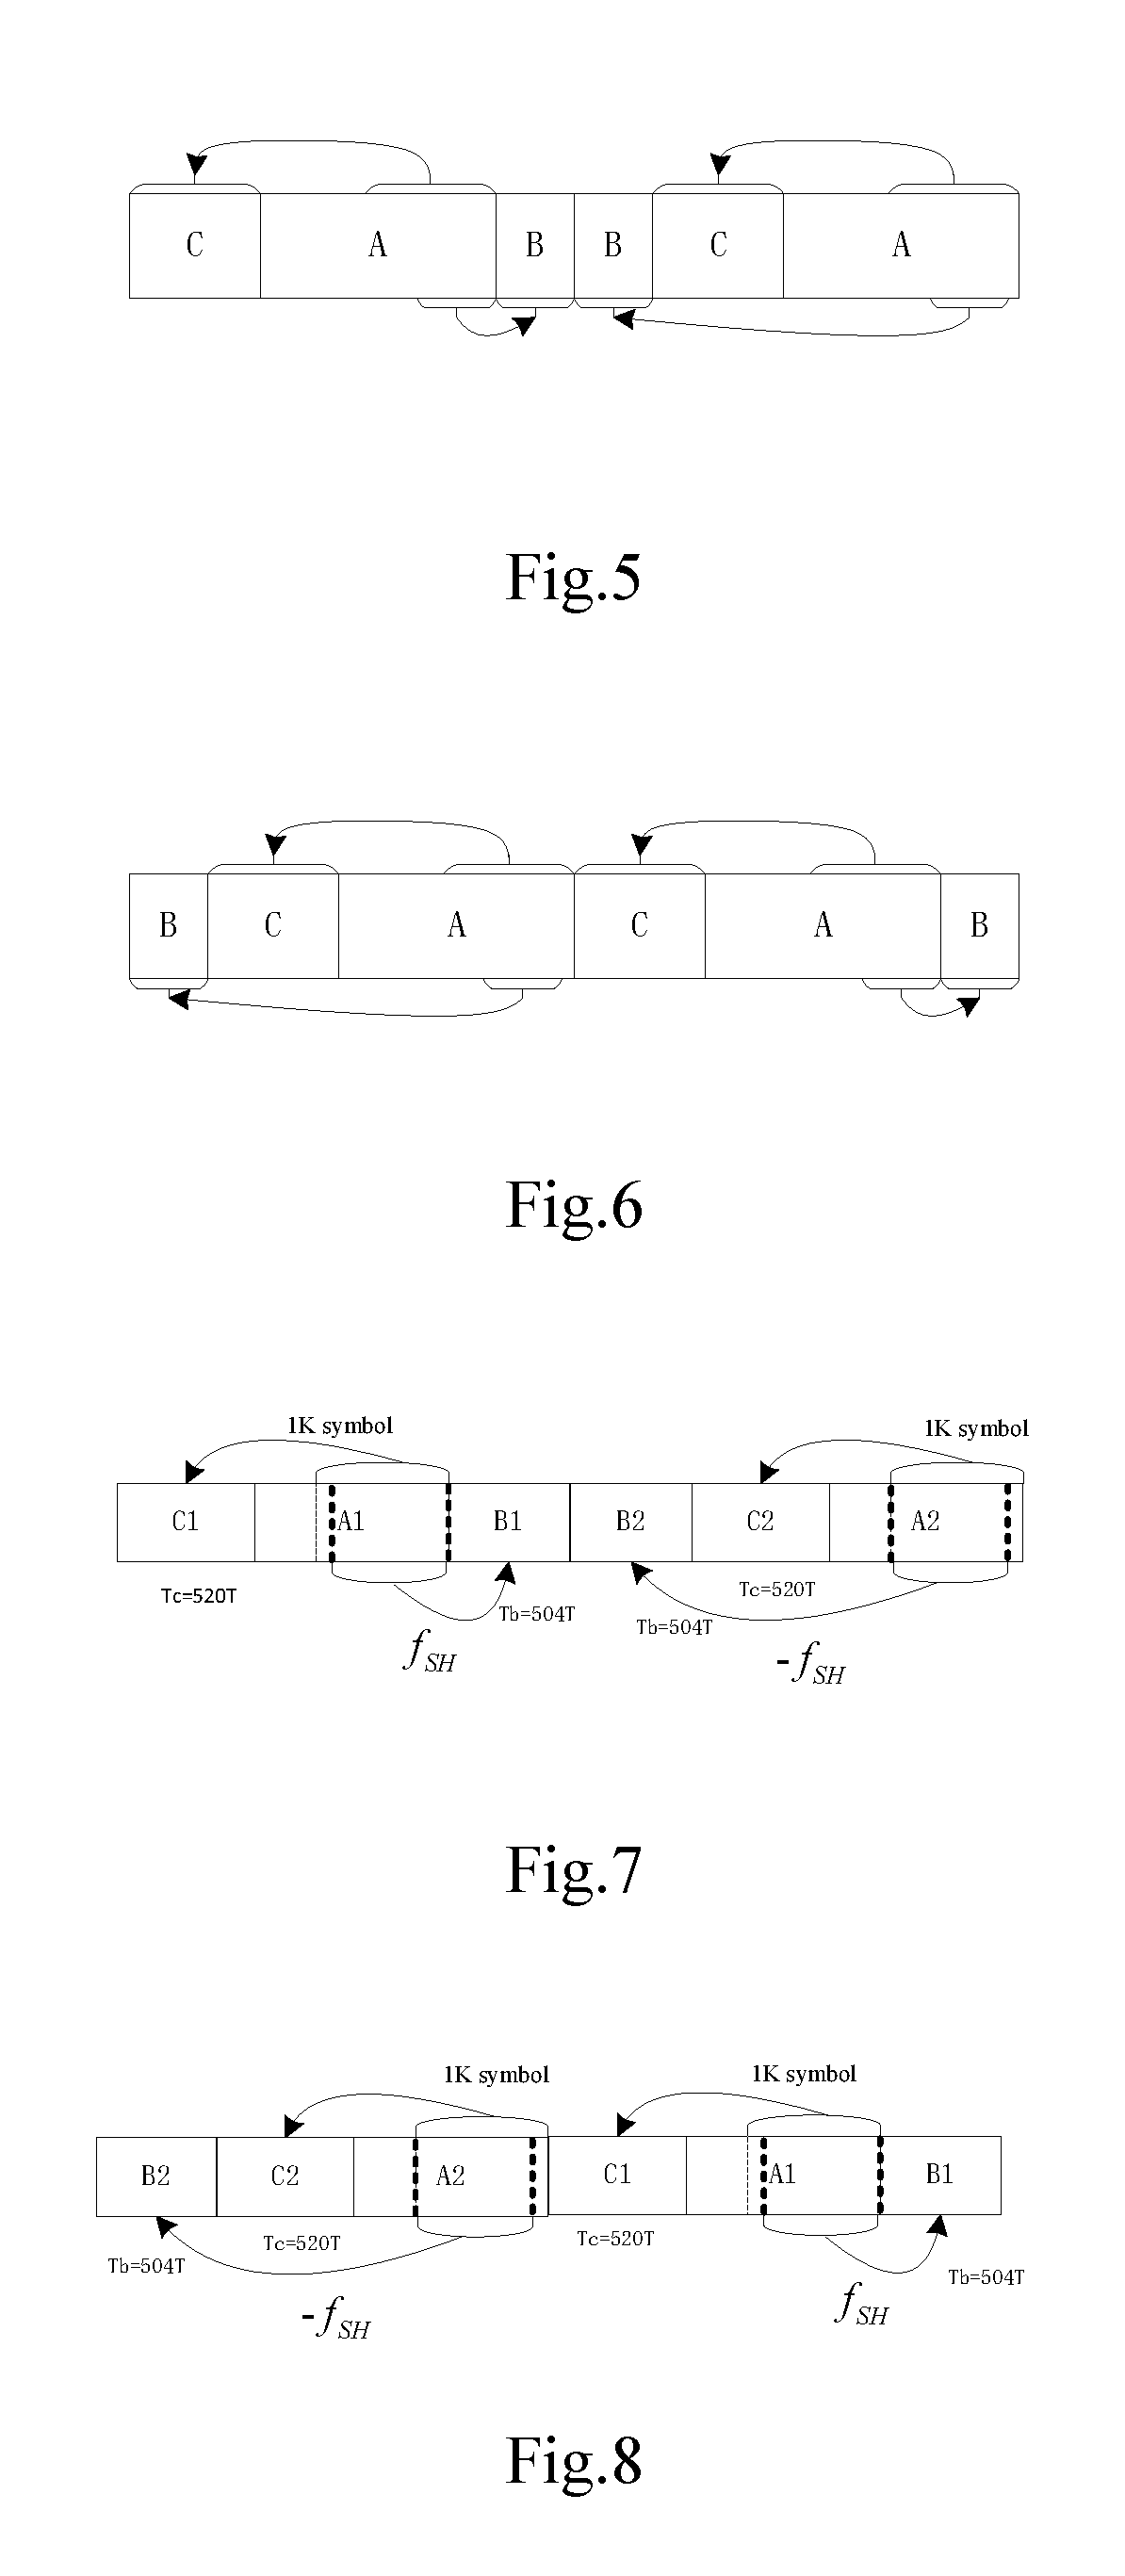 Preamble symbol receiving method and device